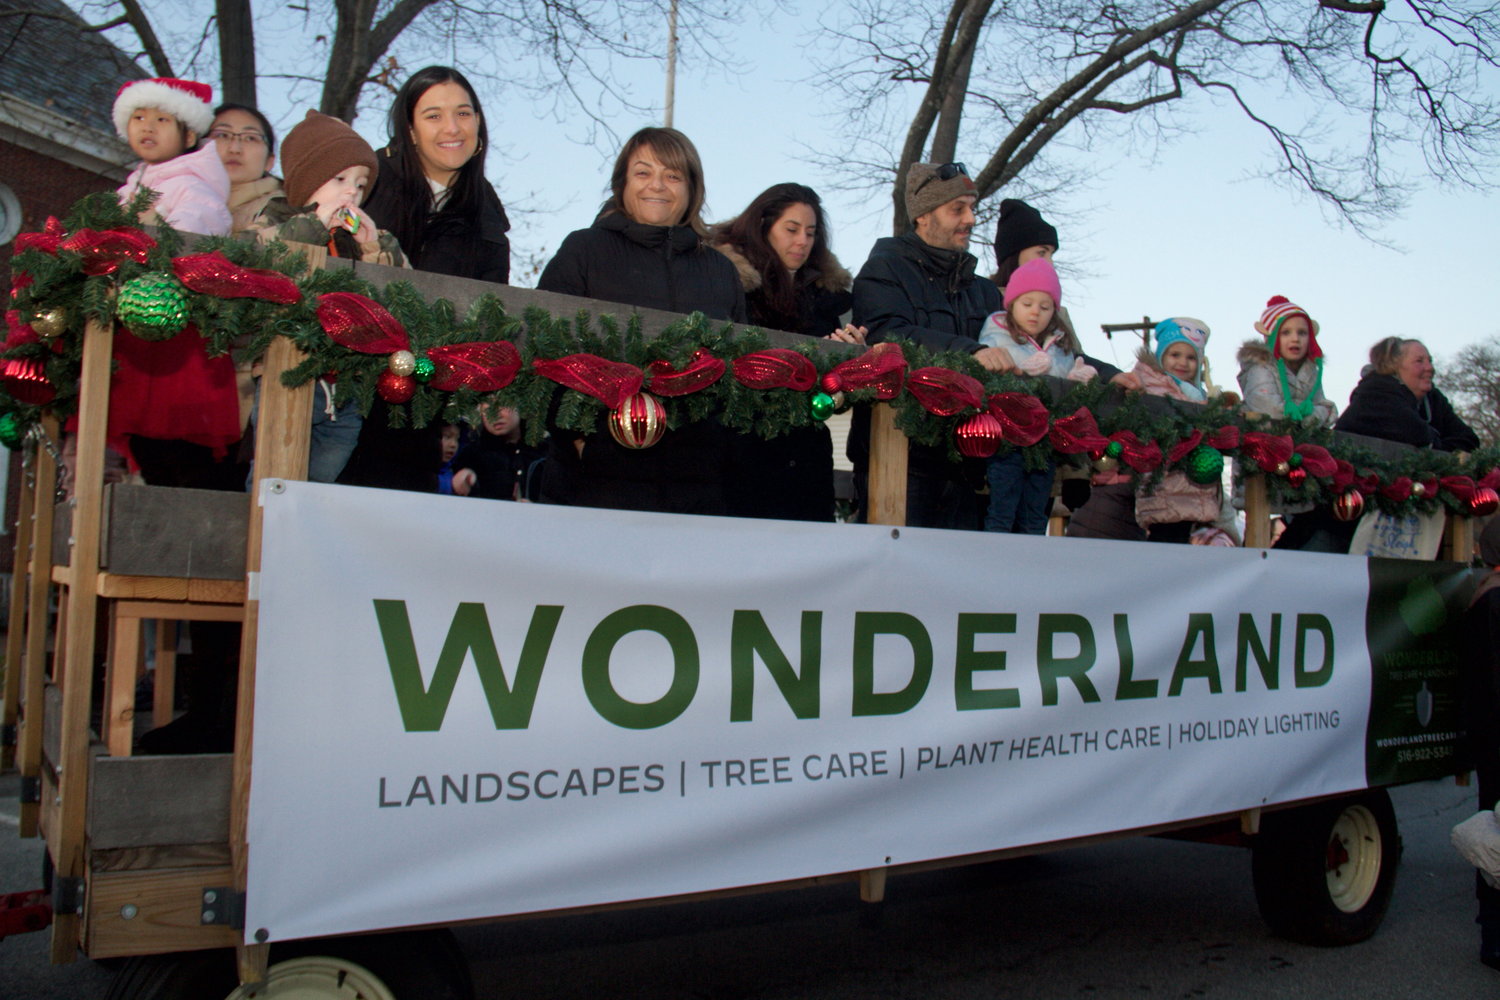 At this holiday event people were offered a ride through Oyster Bay in style on a hayride provided by Wonderland Tree Care + Landscape.